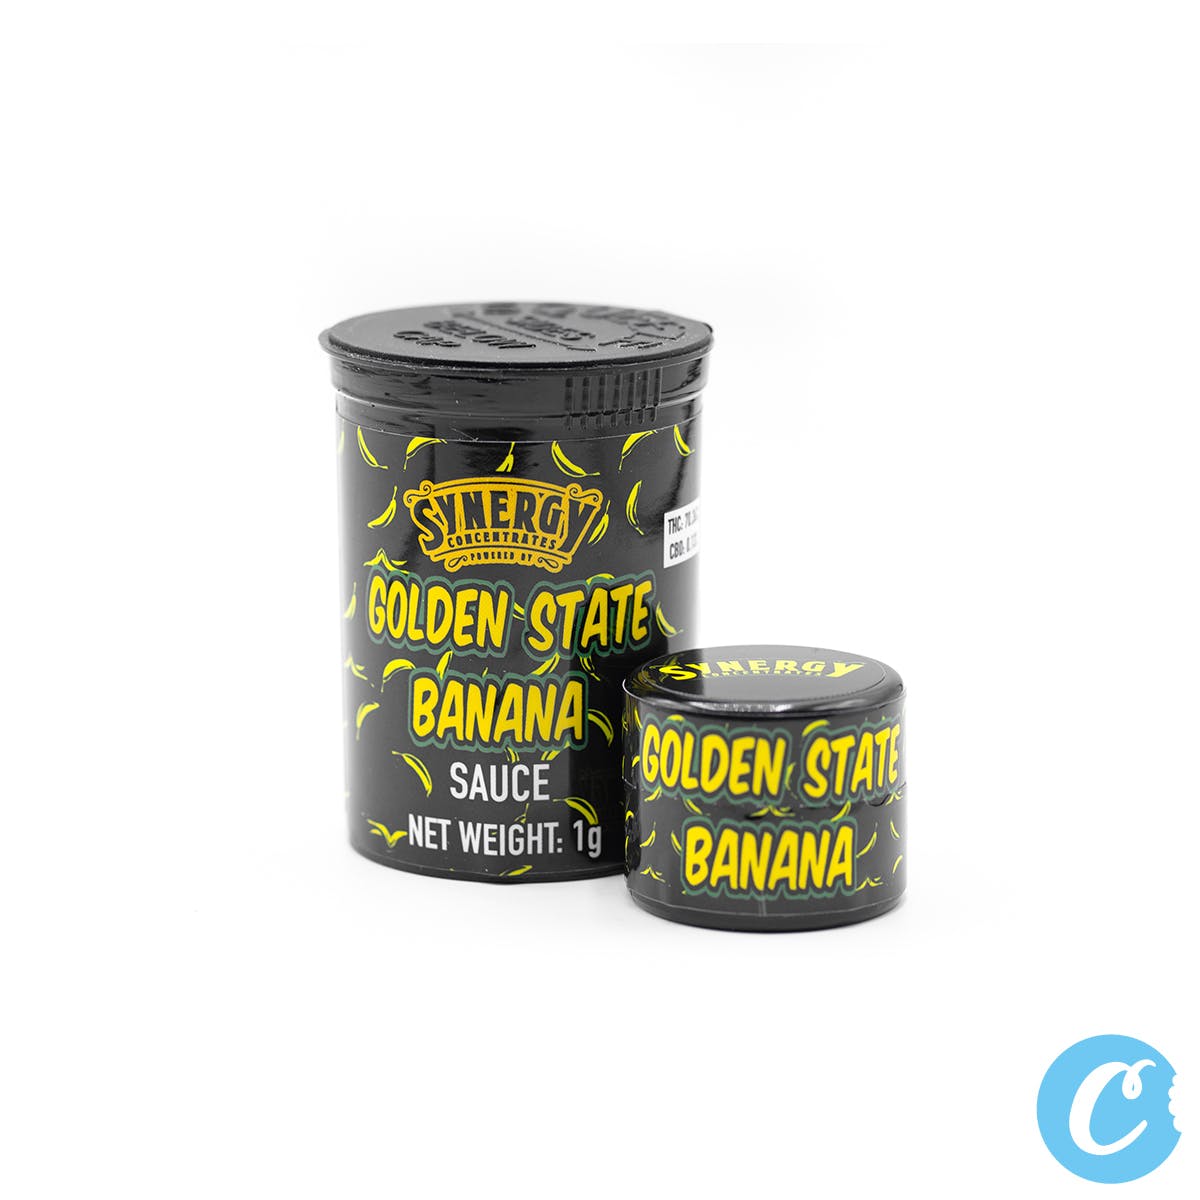 SYNERGY CONCENTRATES - Golden State Banana Sauce